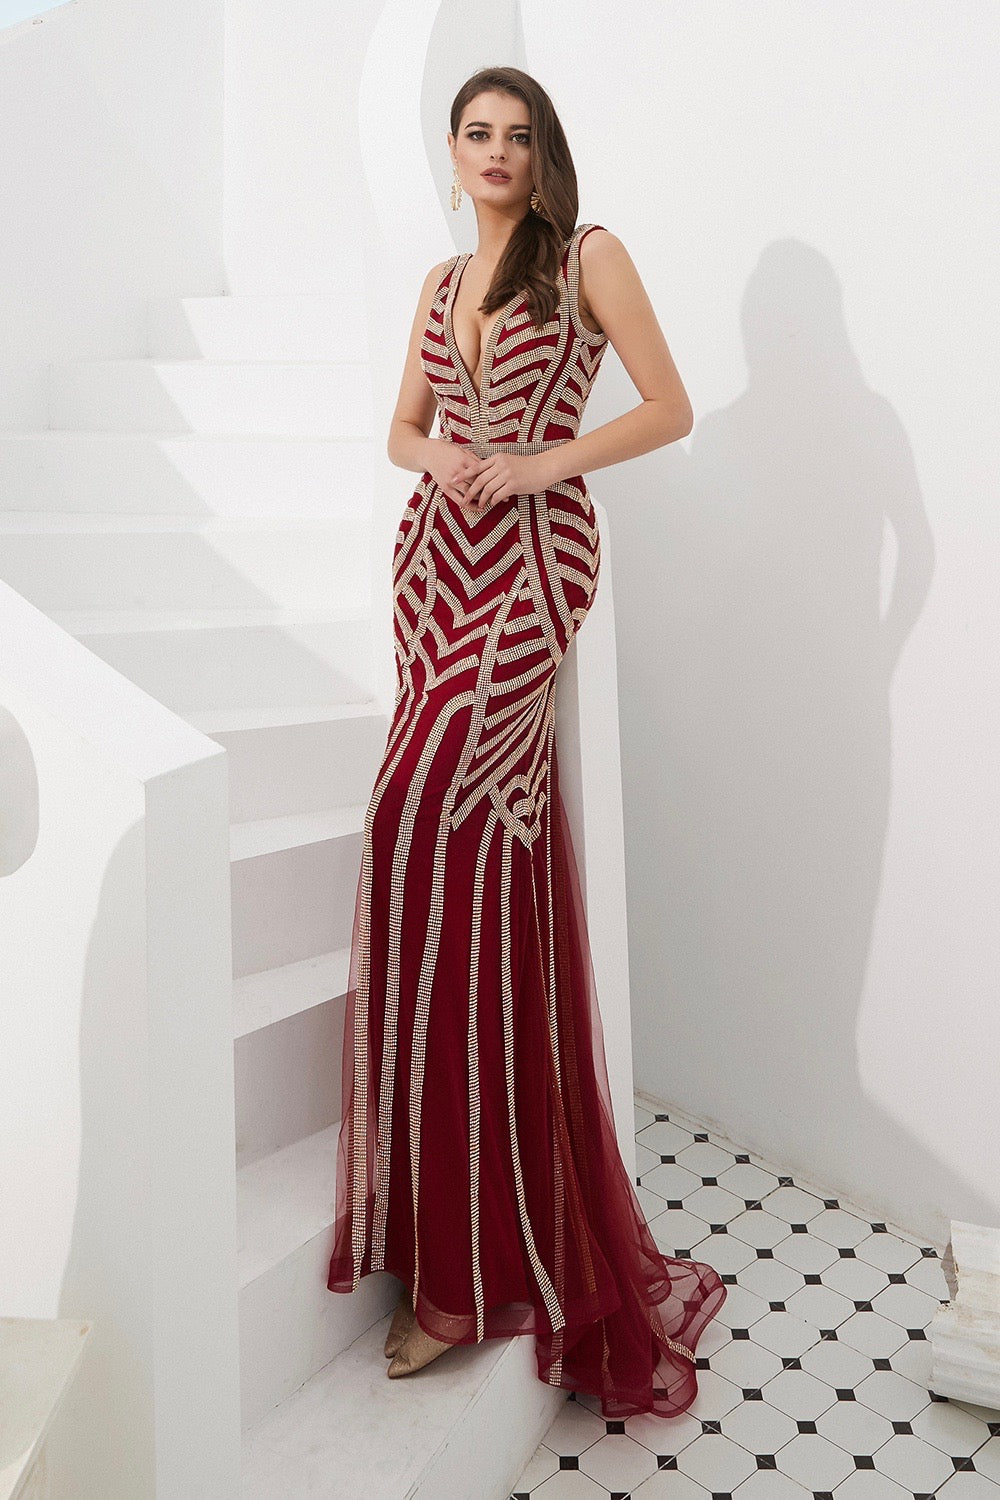 DIAMONDS 2.0 Thick Strap Red &amp; Gold Diamante Sequin Formal Gown Private Label$ AfterPay Humm ZipPay LayBuy Sezzle